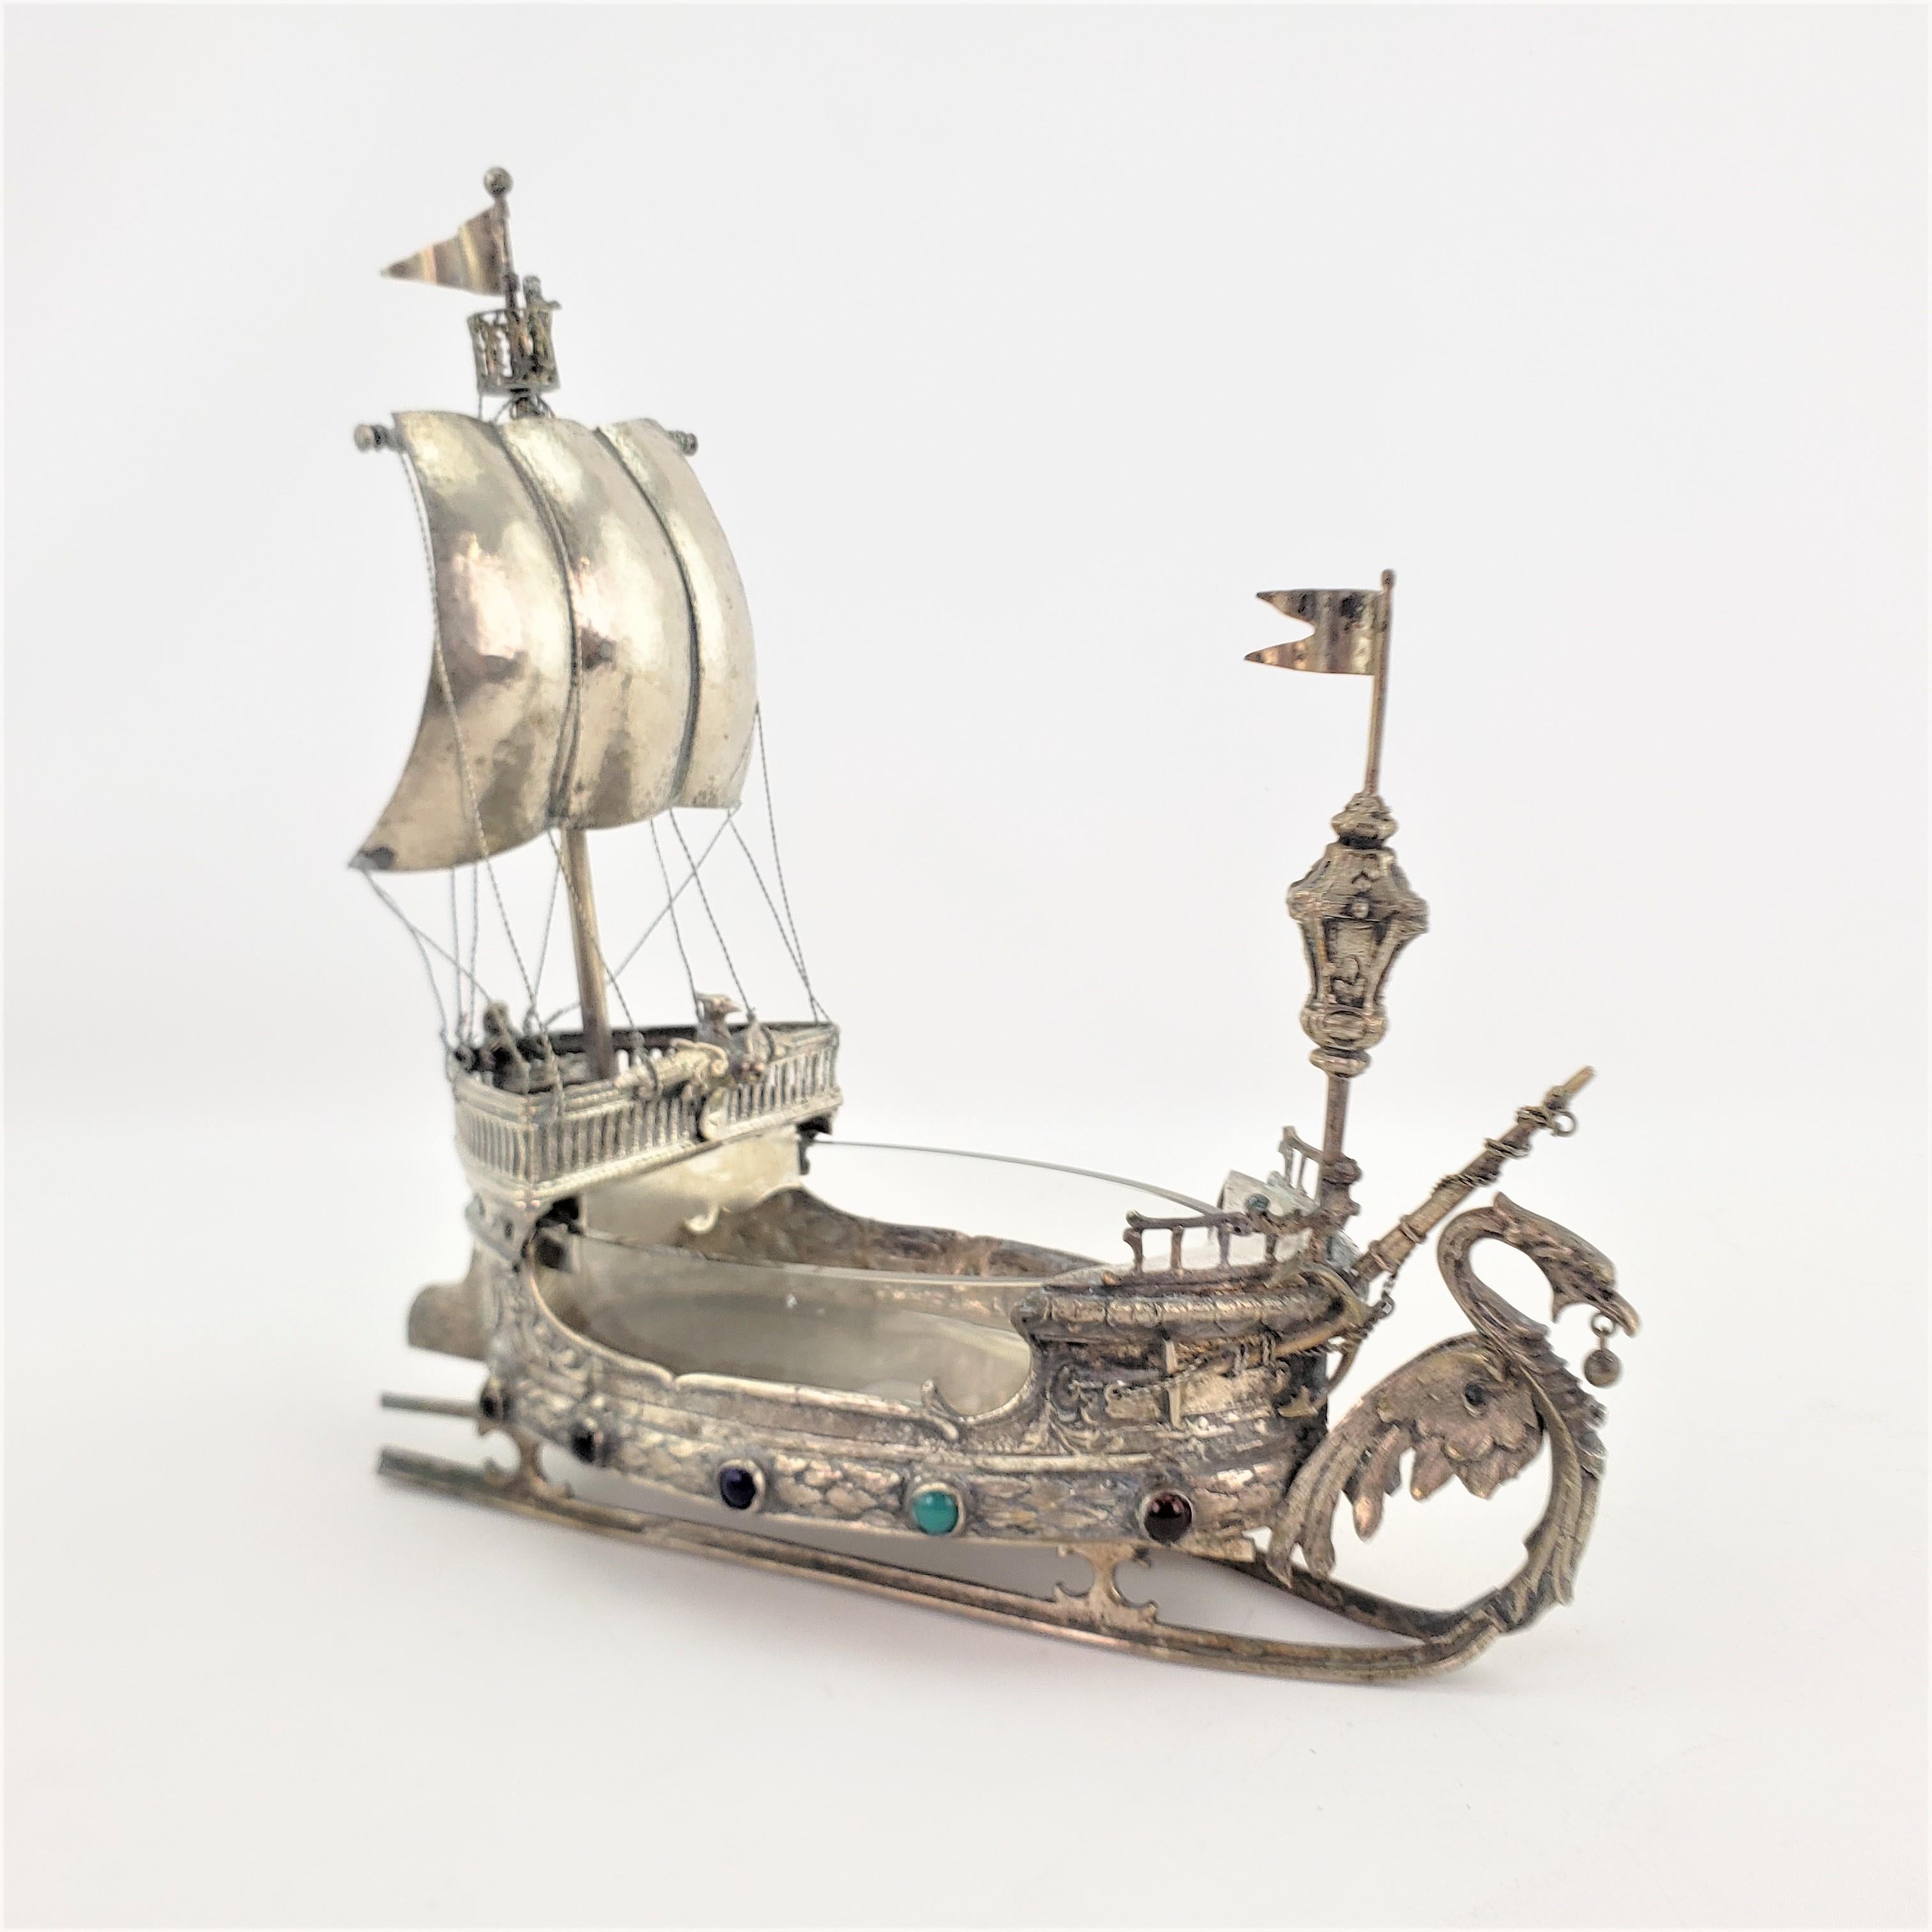 This antique nef was made by an unknown maker and originated from Germany from approximately 1900 in a Spanish Colonial style. The ship or galleon is composed of metal which has been nickel silver plated, to give the appearance of silver and is